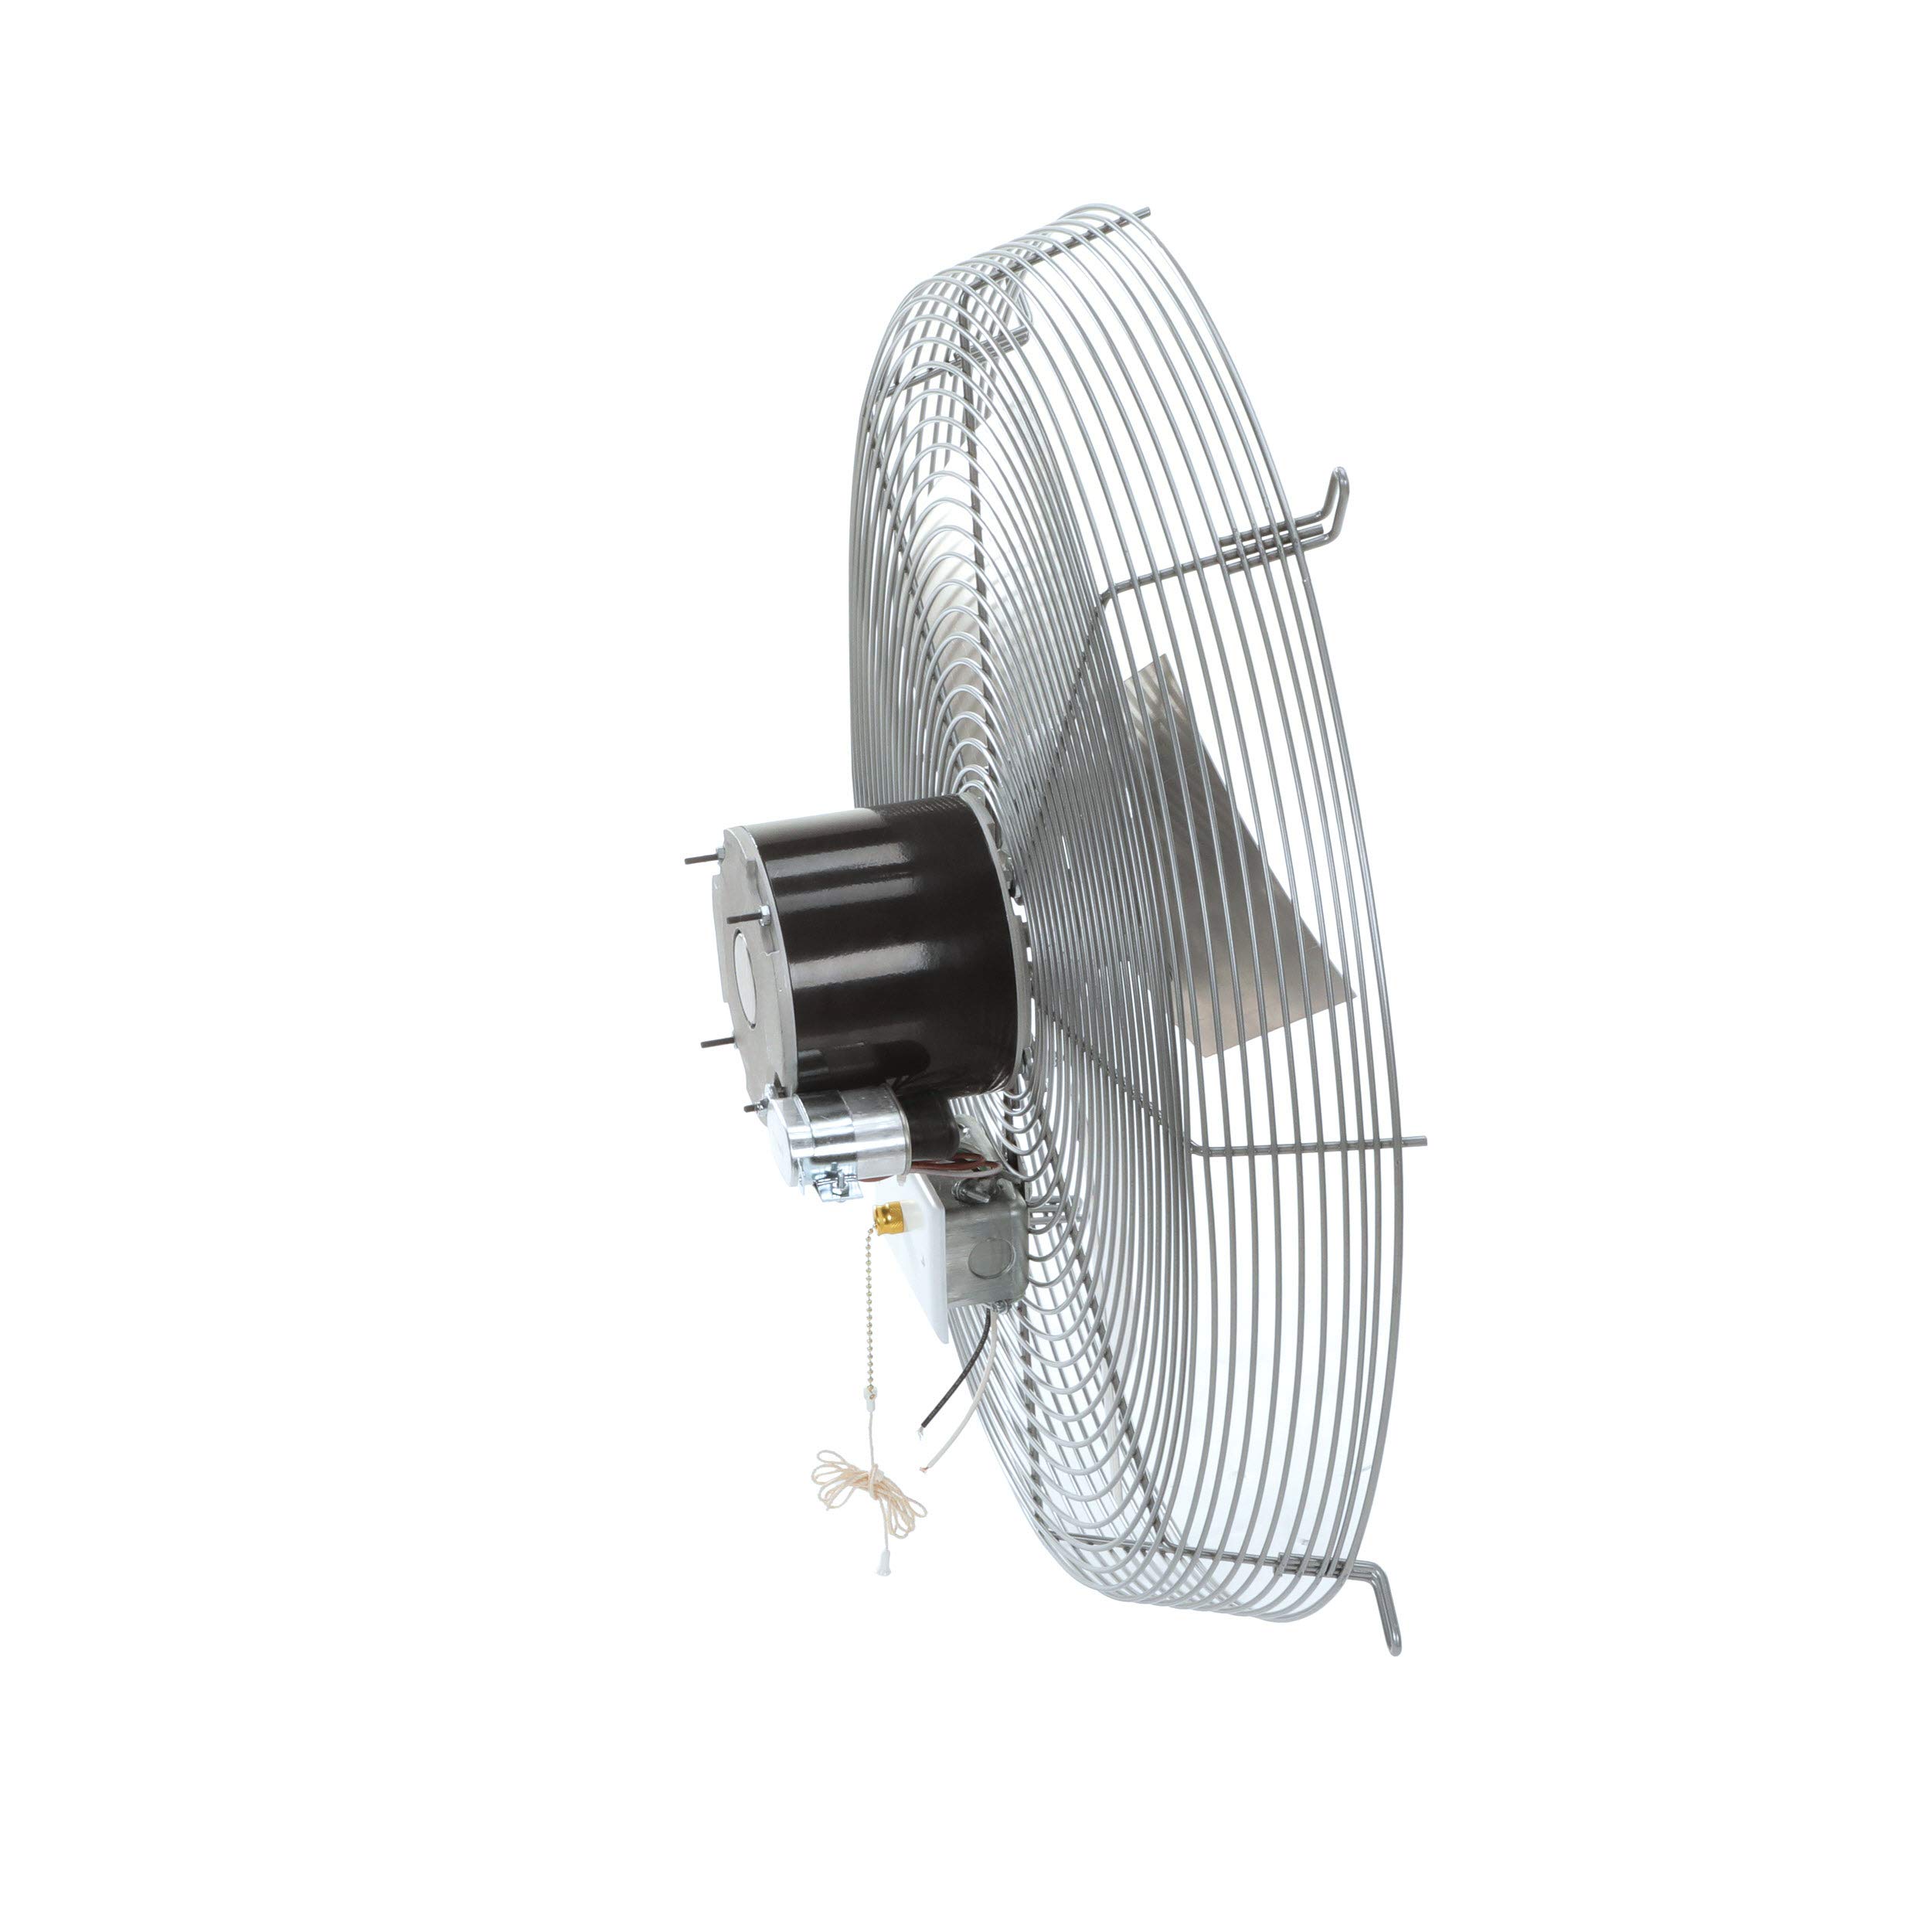 TPI Corporation CE-24-D Direct Drive Exhaust Fan, Guard Mounted, Single Phase, 24